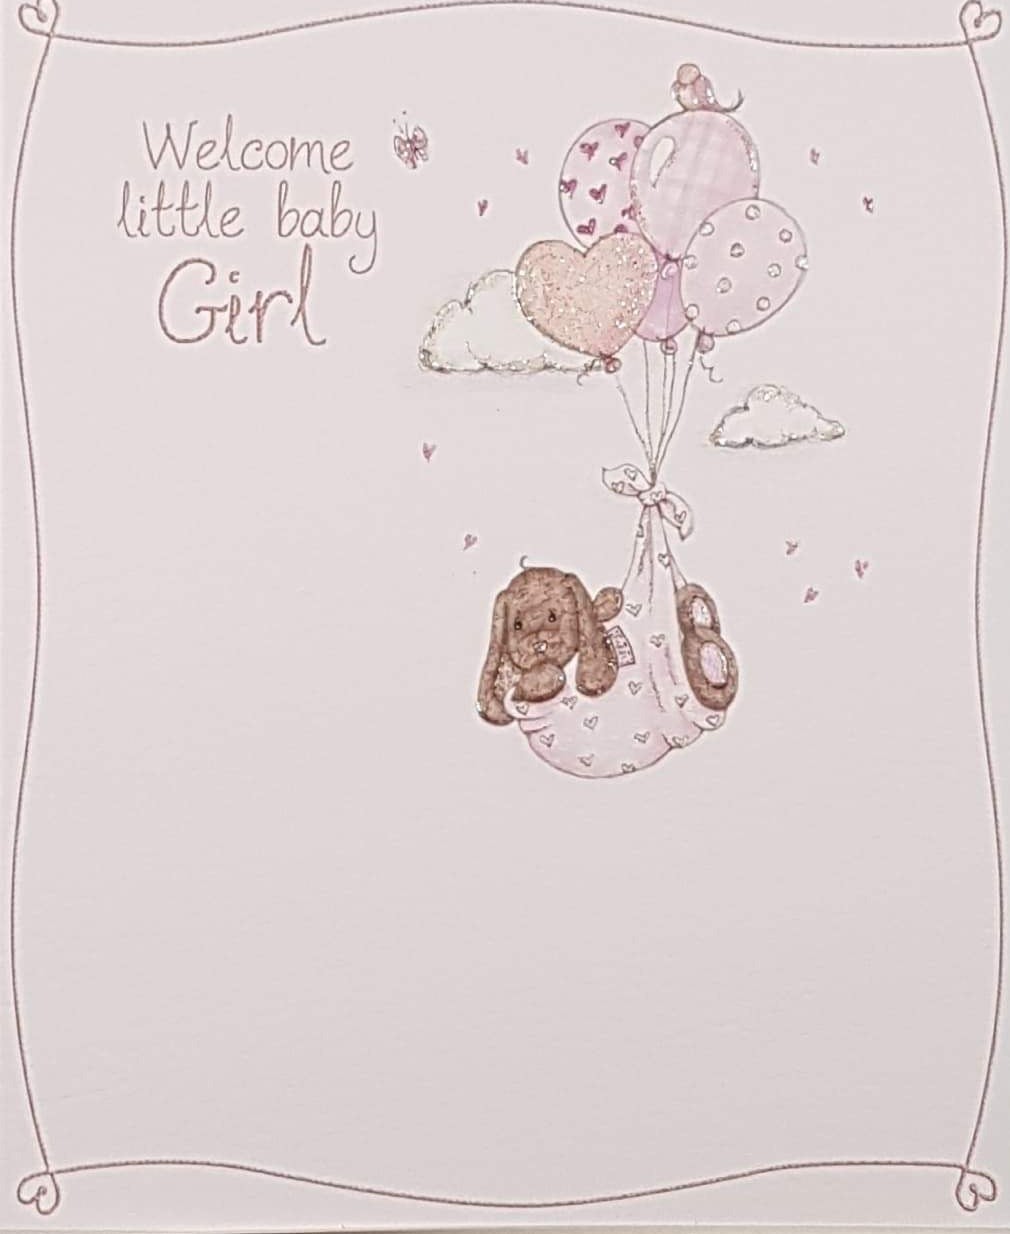 New Baby Card - Girl / A Small Bird Sitting On The Flying Pink Balloons Holding A Bunny